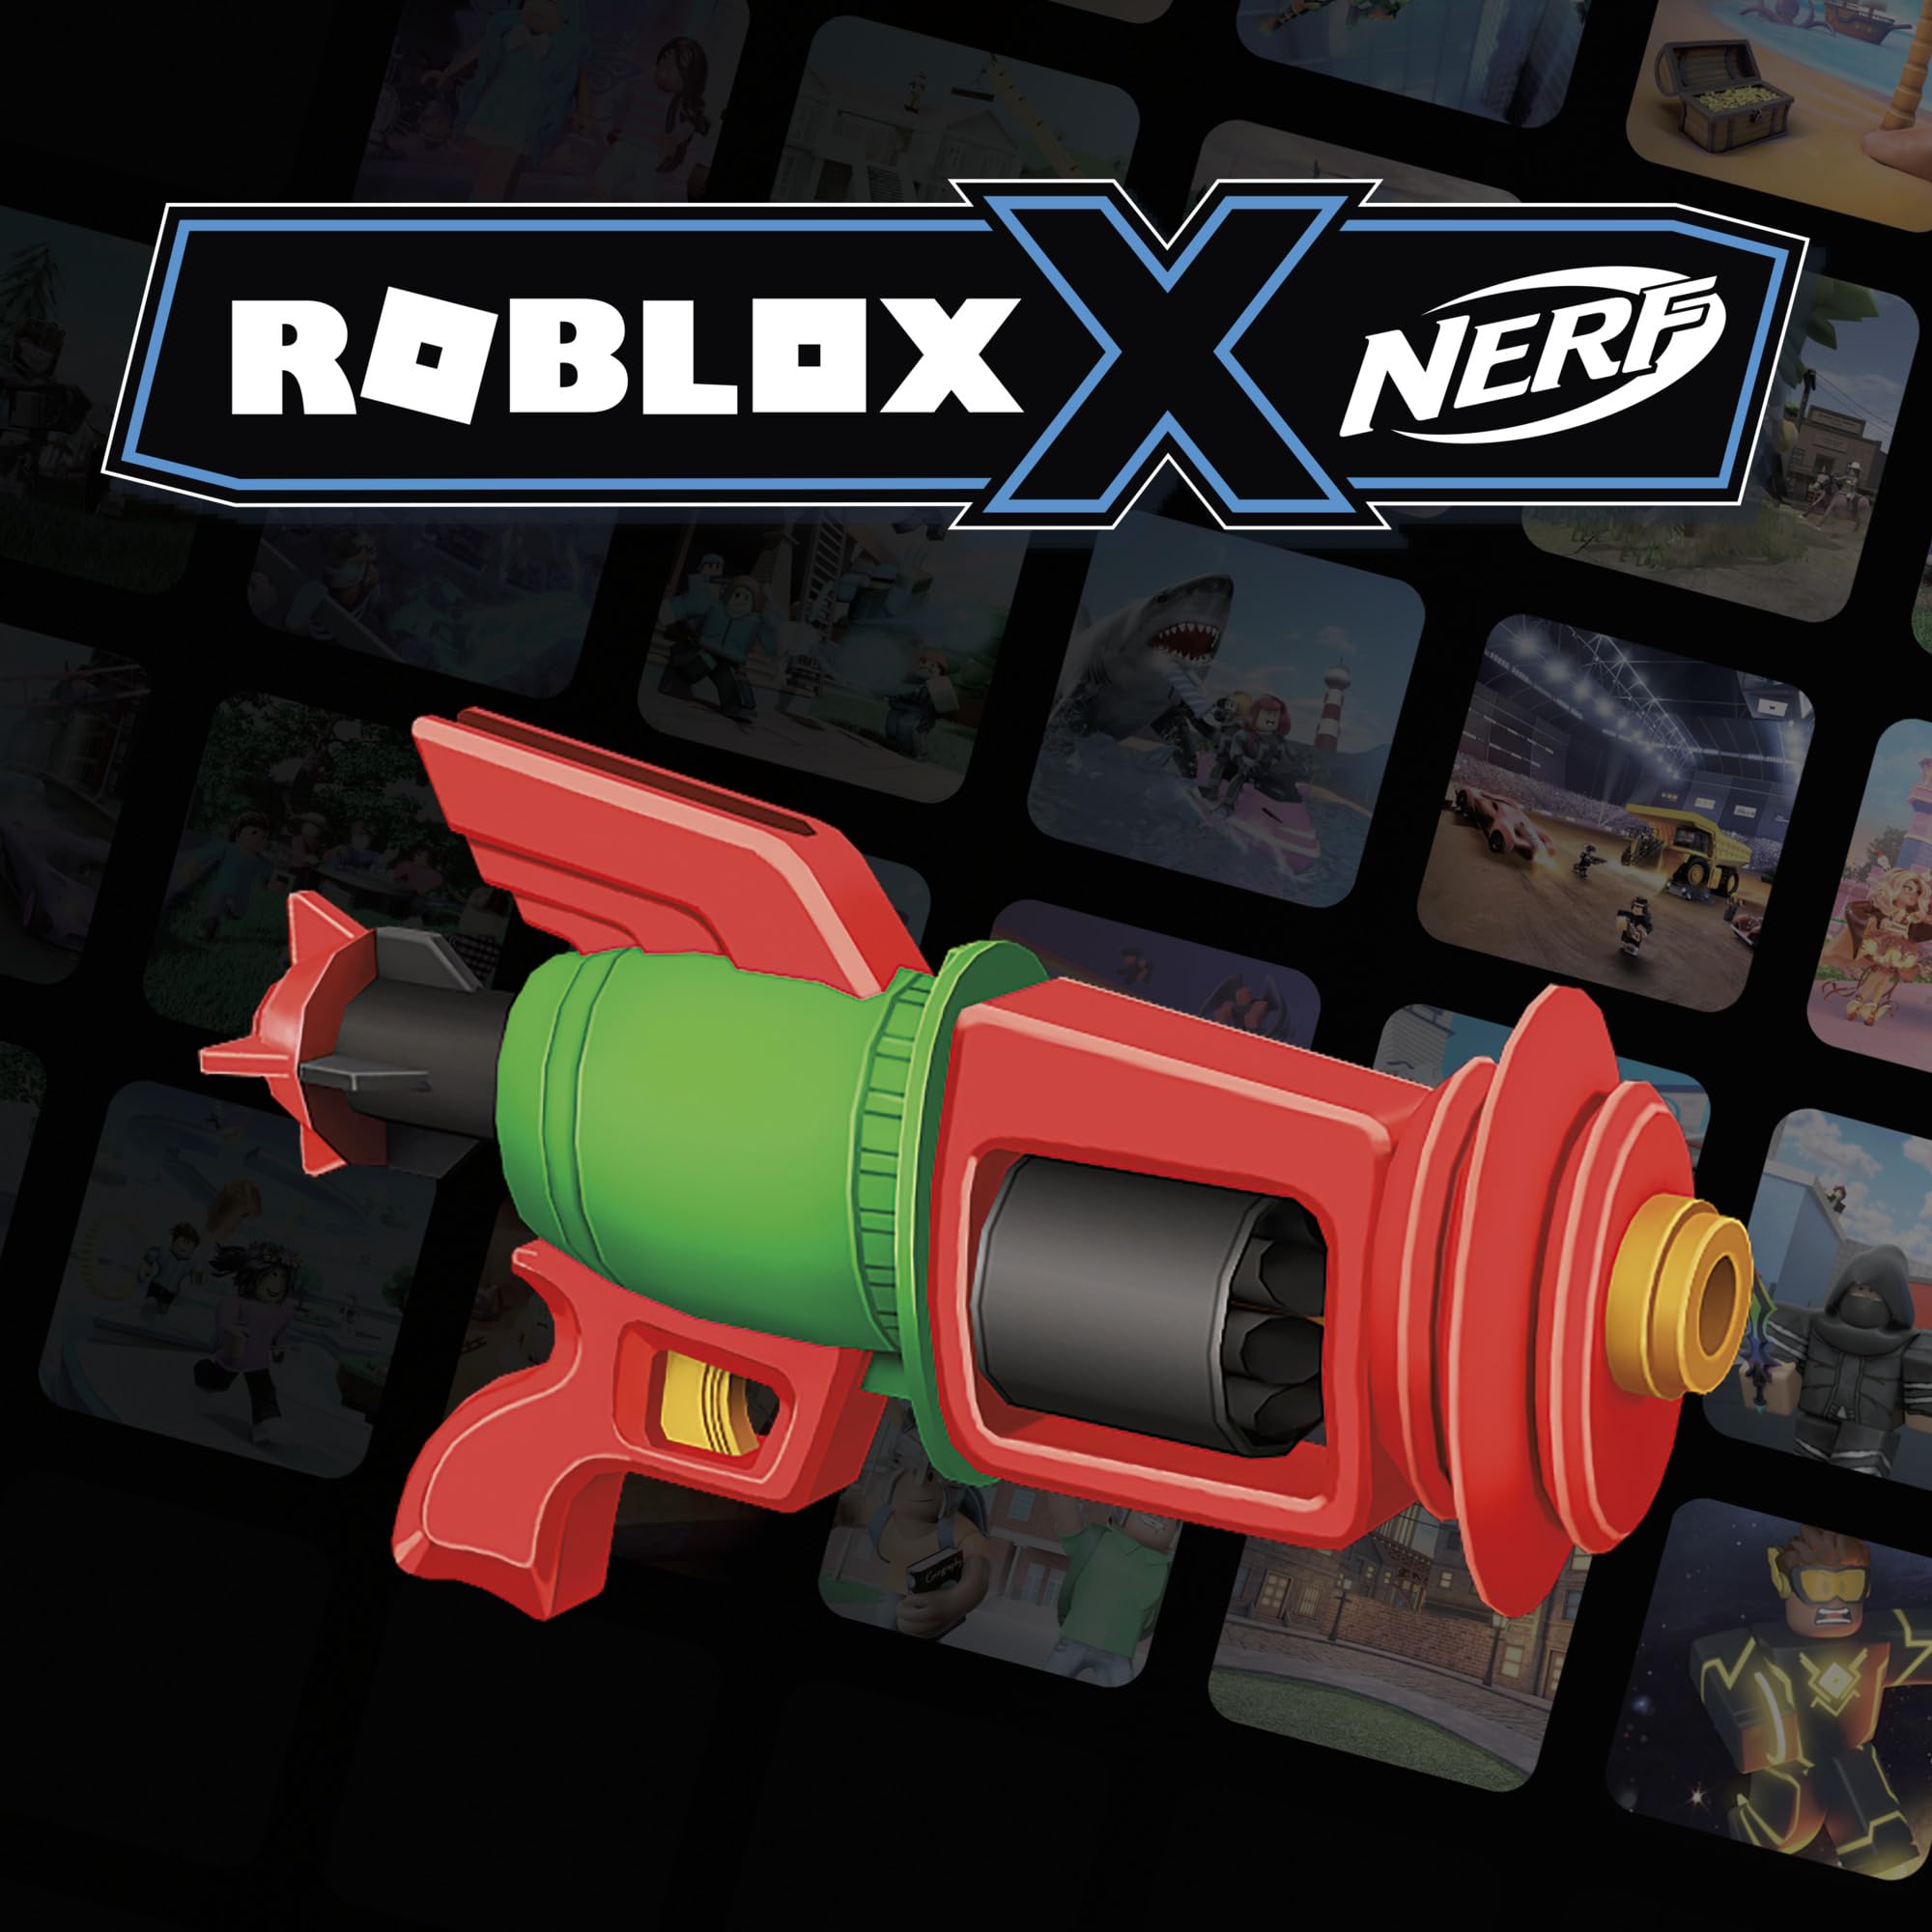 NERF Roblox Build A Boat for Treasure: Spacelock Ray Blaster, Includes Code to Redeem Exclusive Virtual Item, 8 Elite Darts